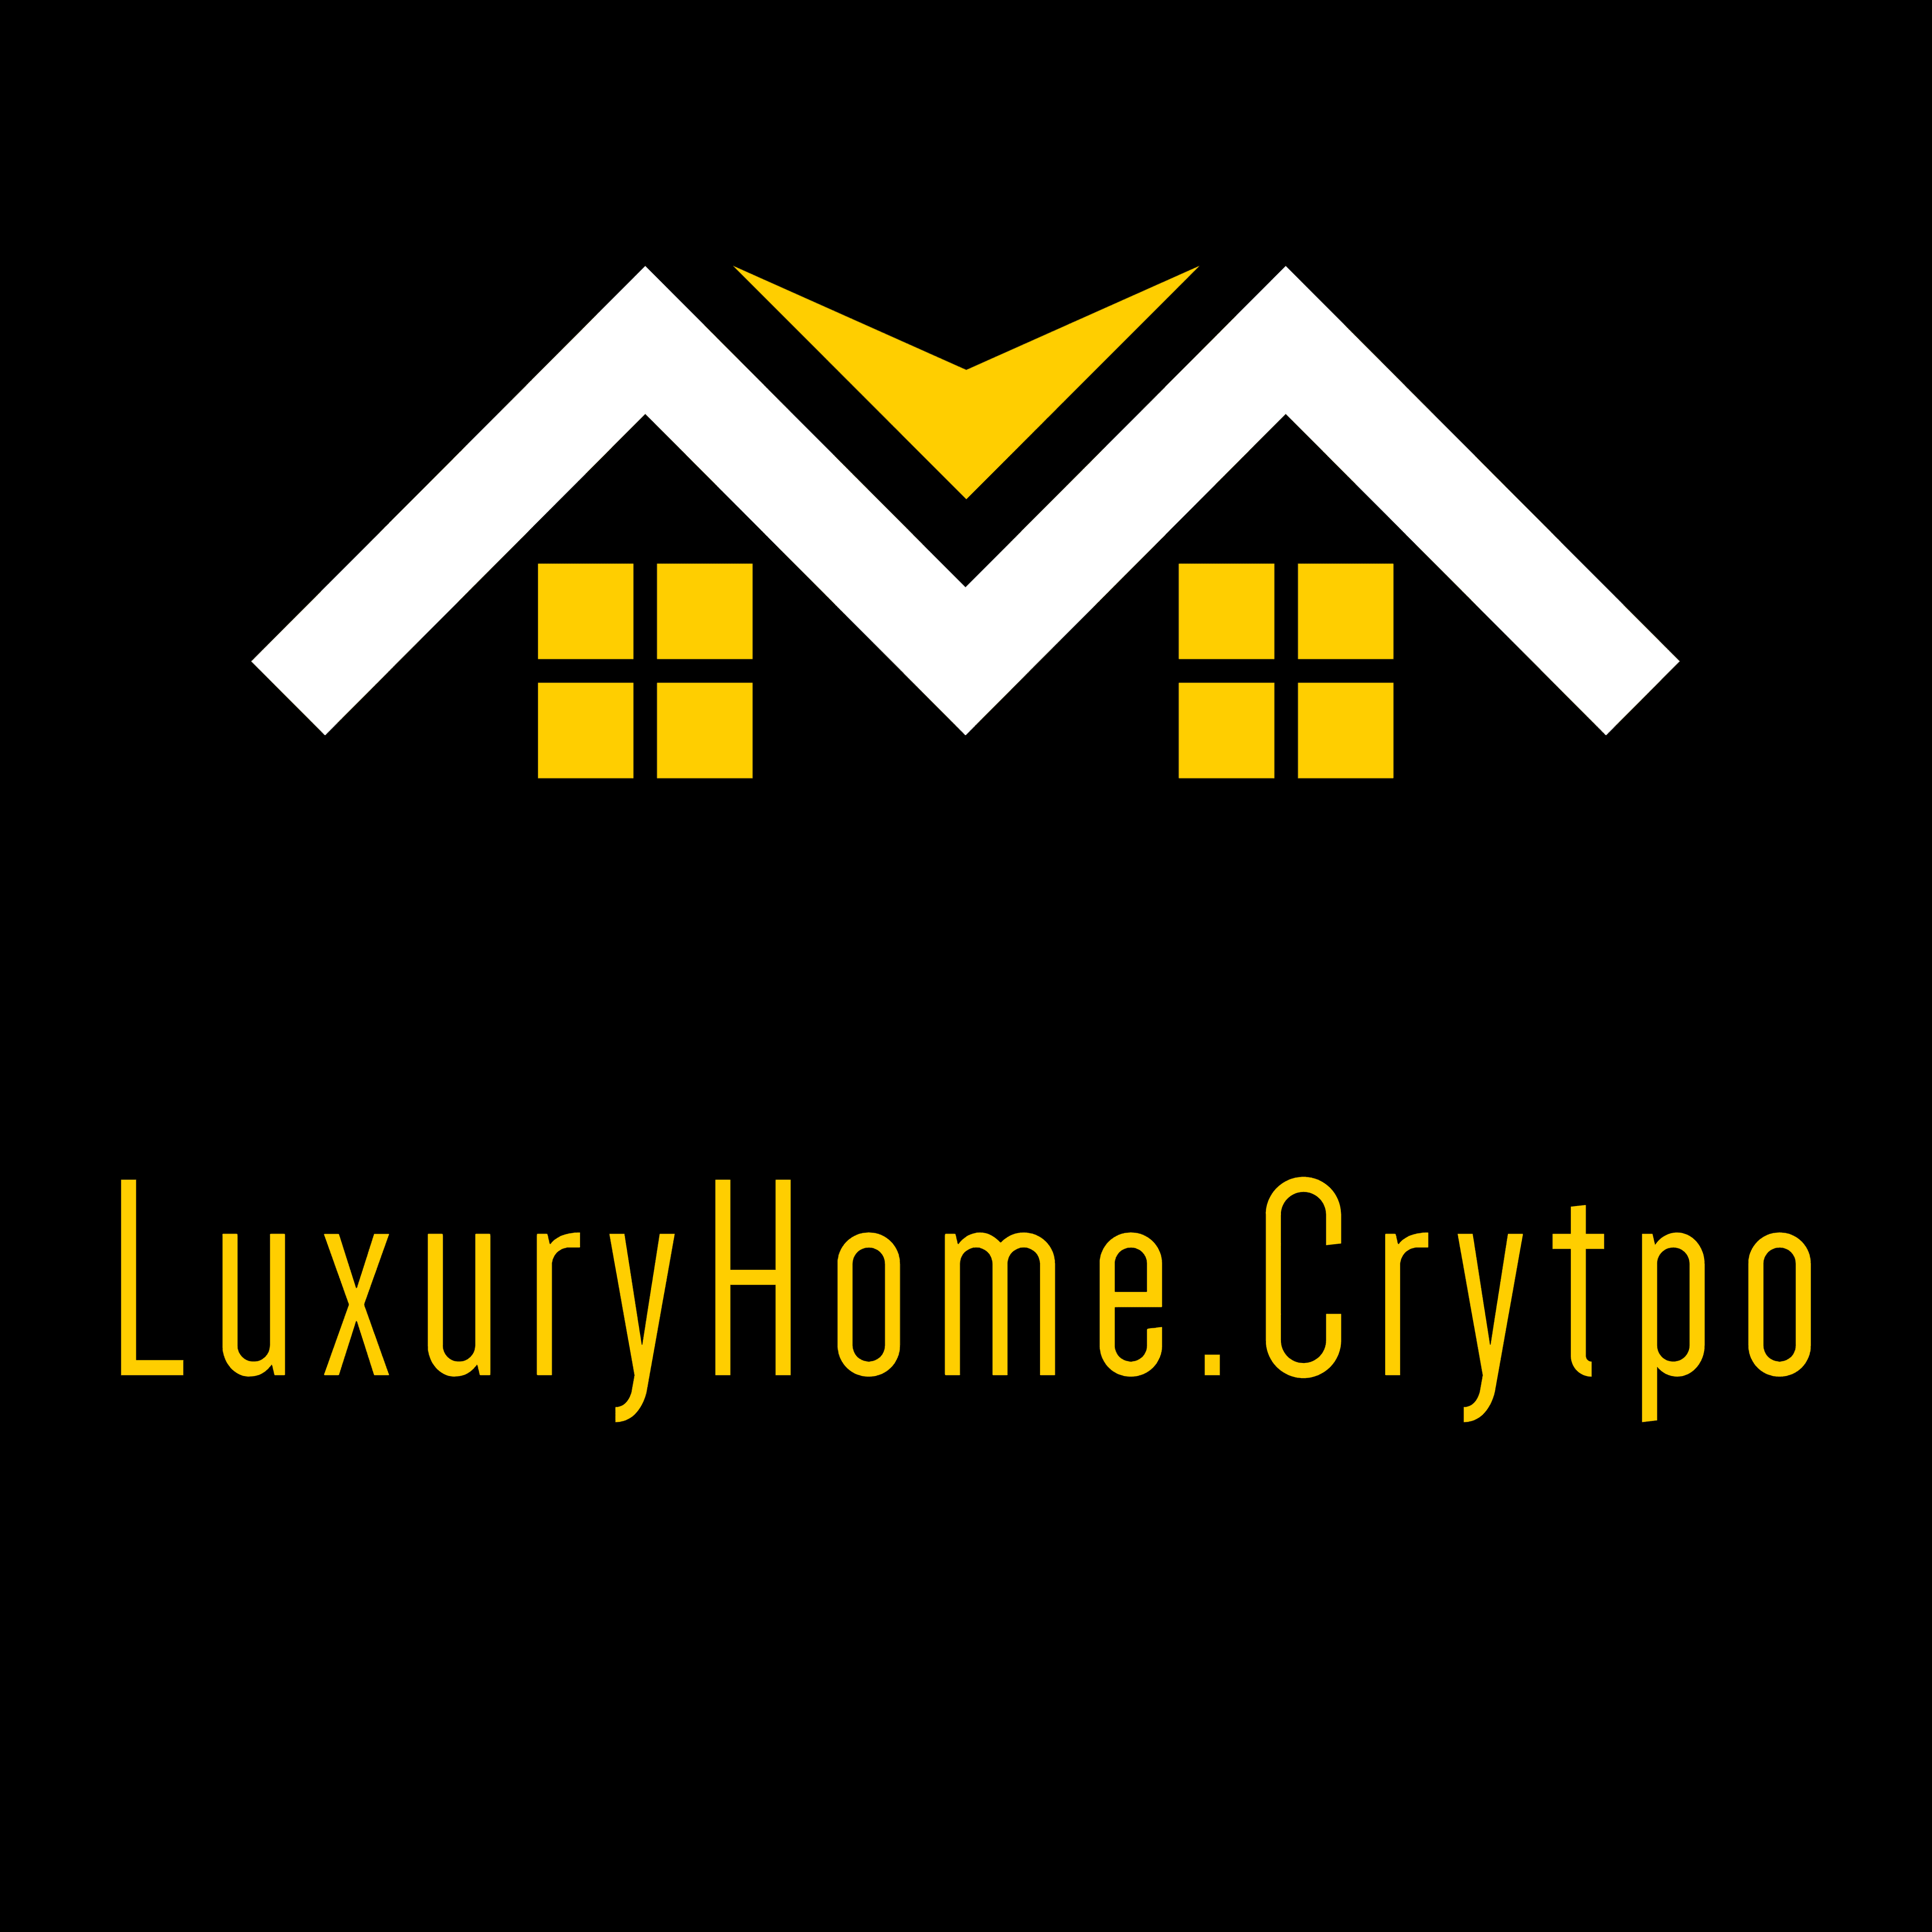 Product LuxuryHome.Crypto Ethereum Blockchain Website For Sale Or Lease - UPLY MEDIA Digital Marketing Company image